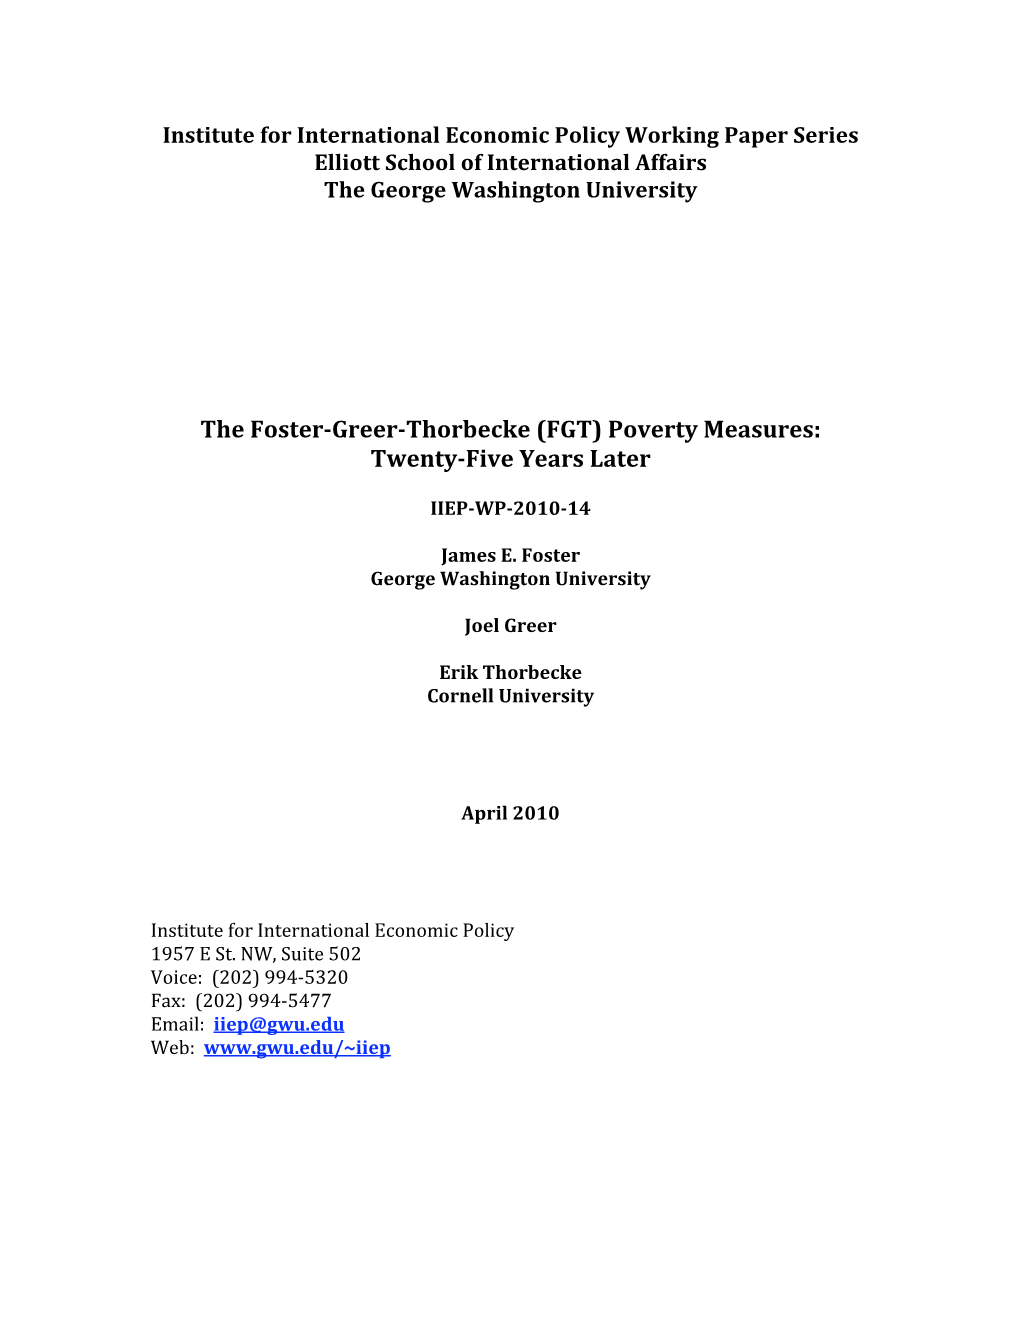 The Foster-Greer-Thorbecke (FGT) Poverty Measures: Twenty-Five Years Later